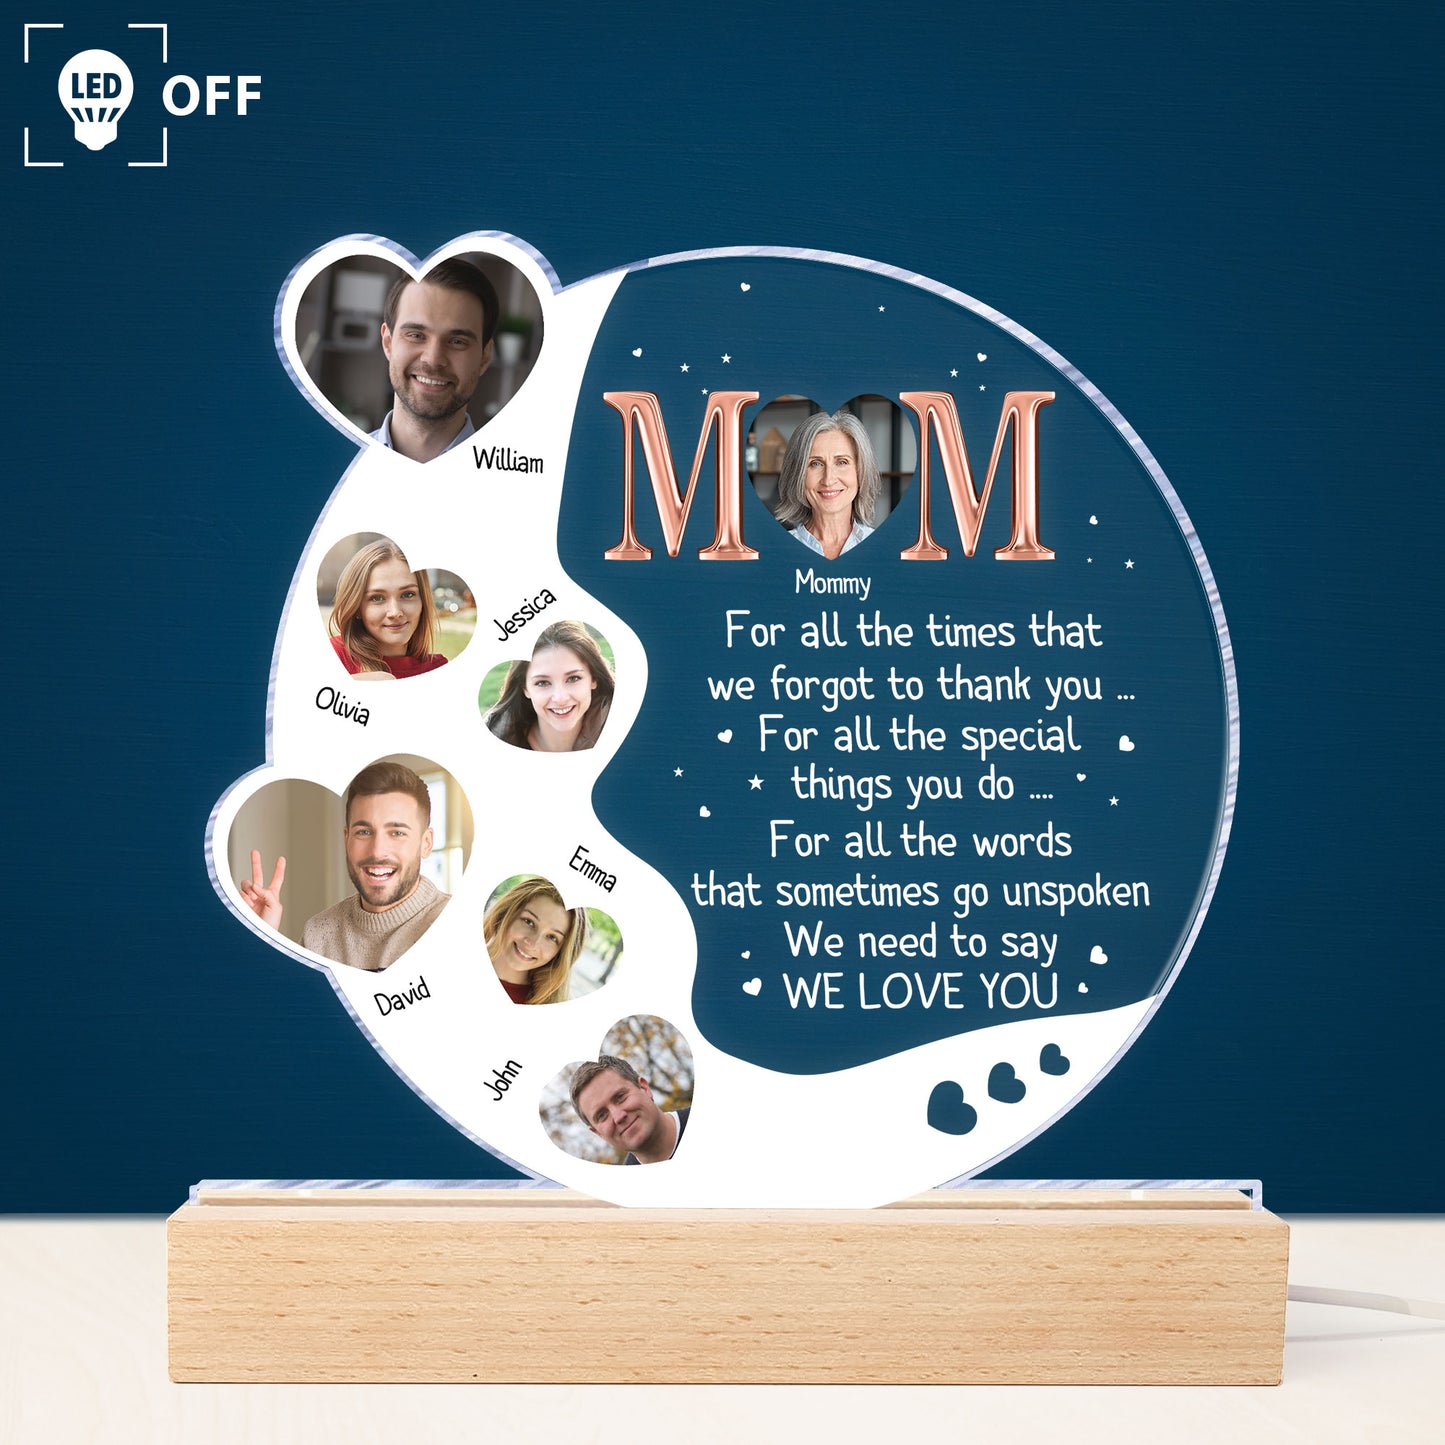 We Need To Say We Love You - Personalized Photo LED Light